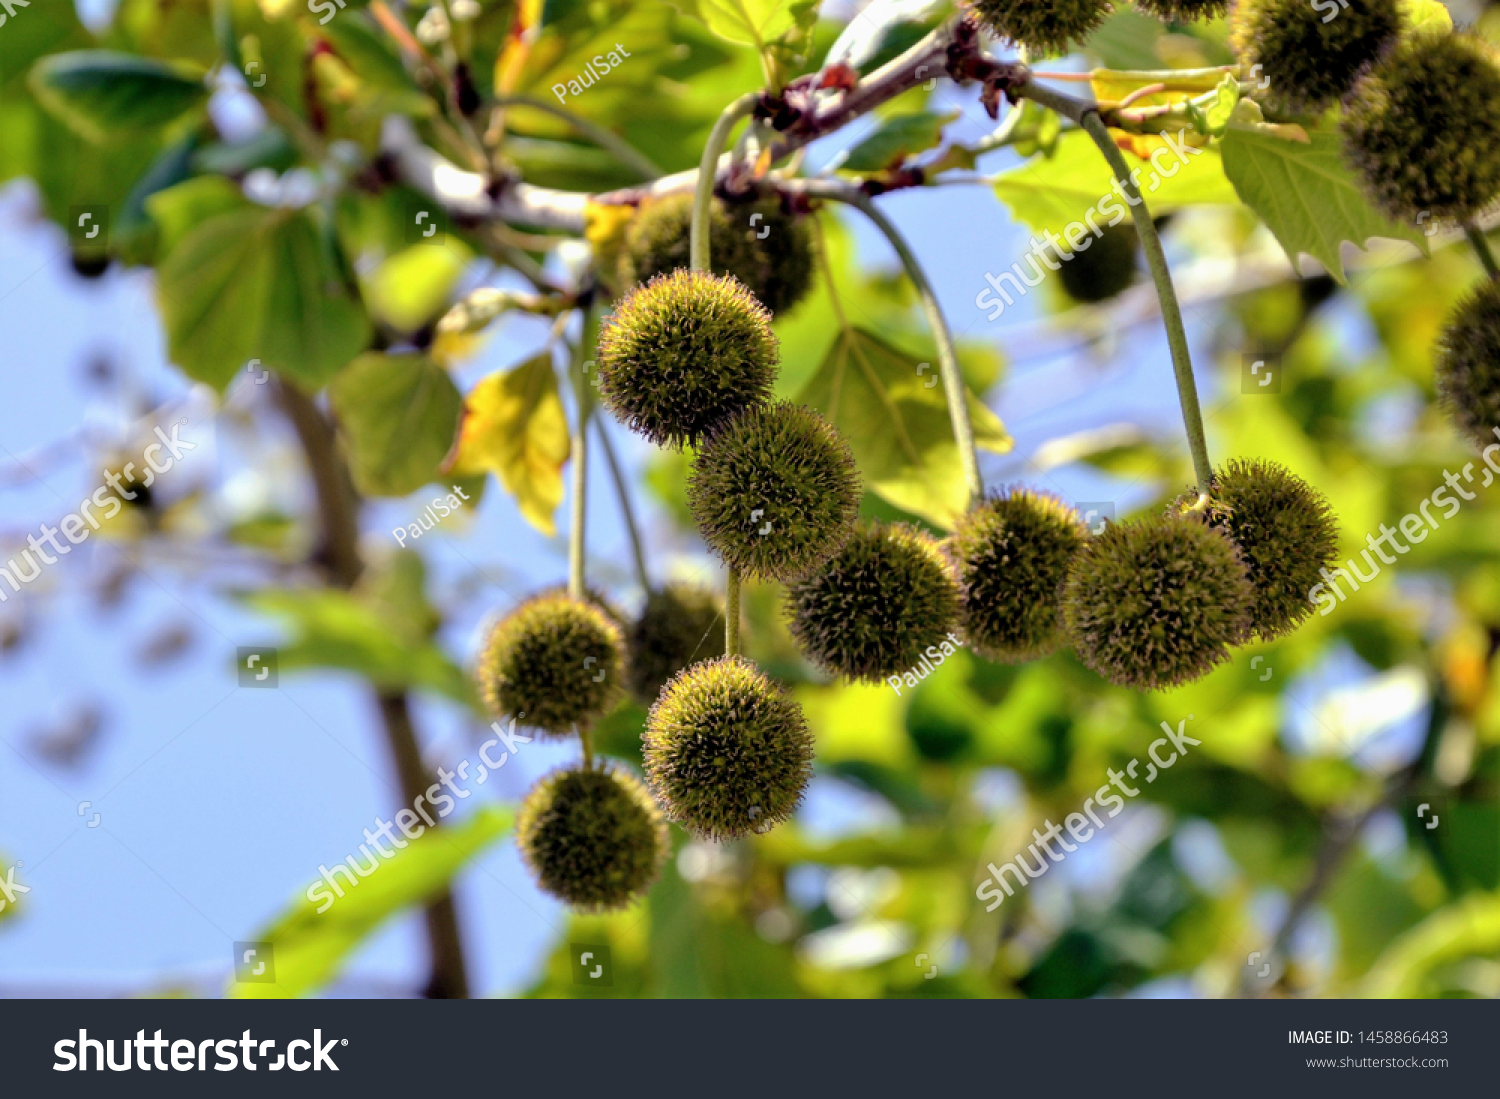 Sycamore tree leaves and fruit